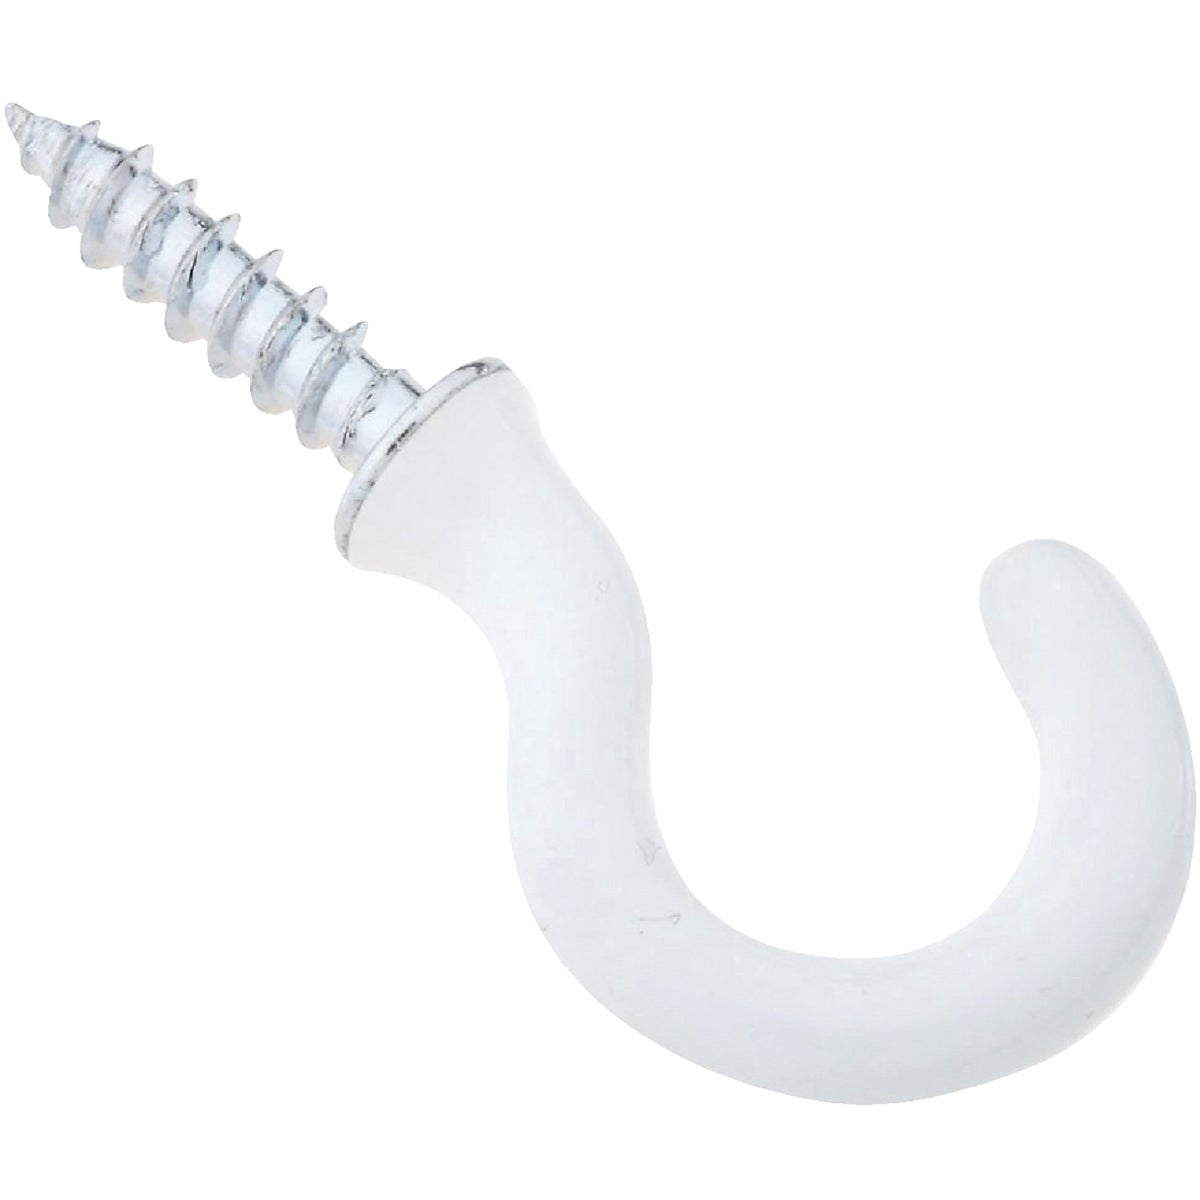 National 3/4 In. White Vinyl Cup Hook (5 Count)